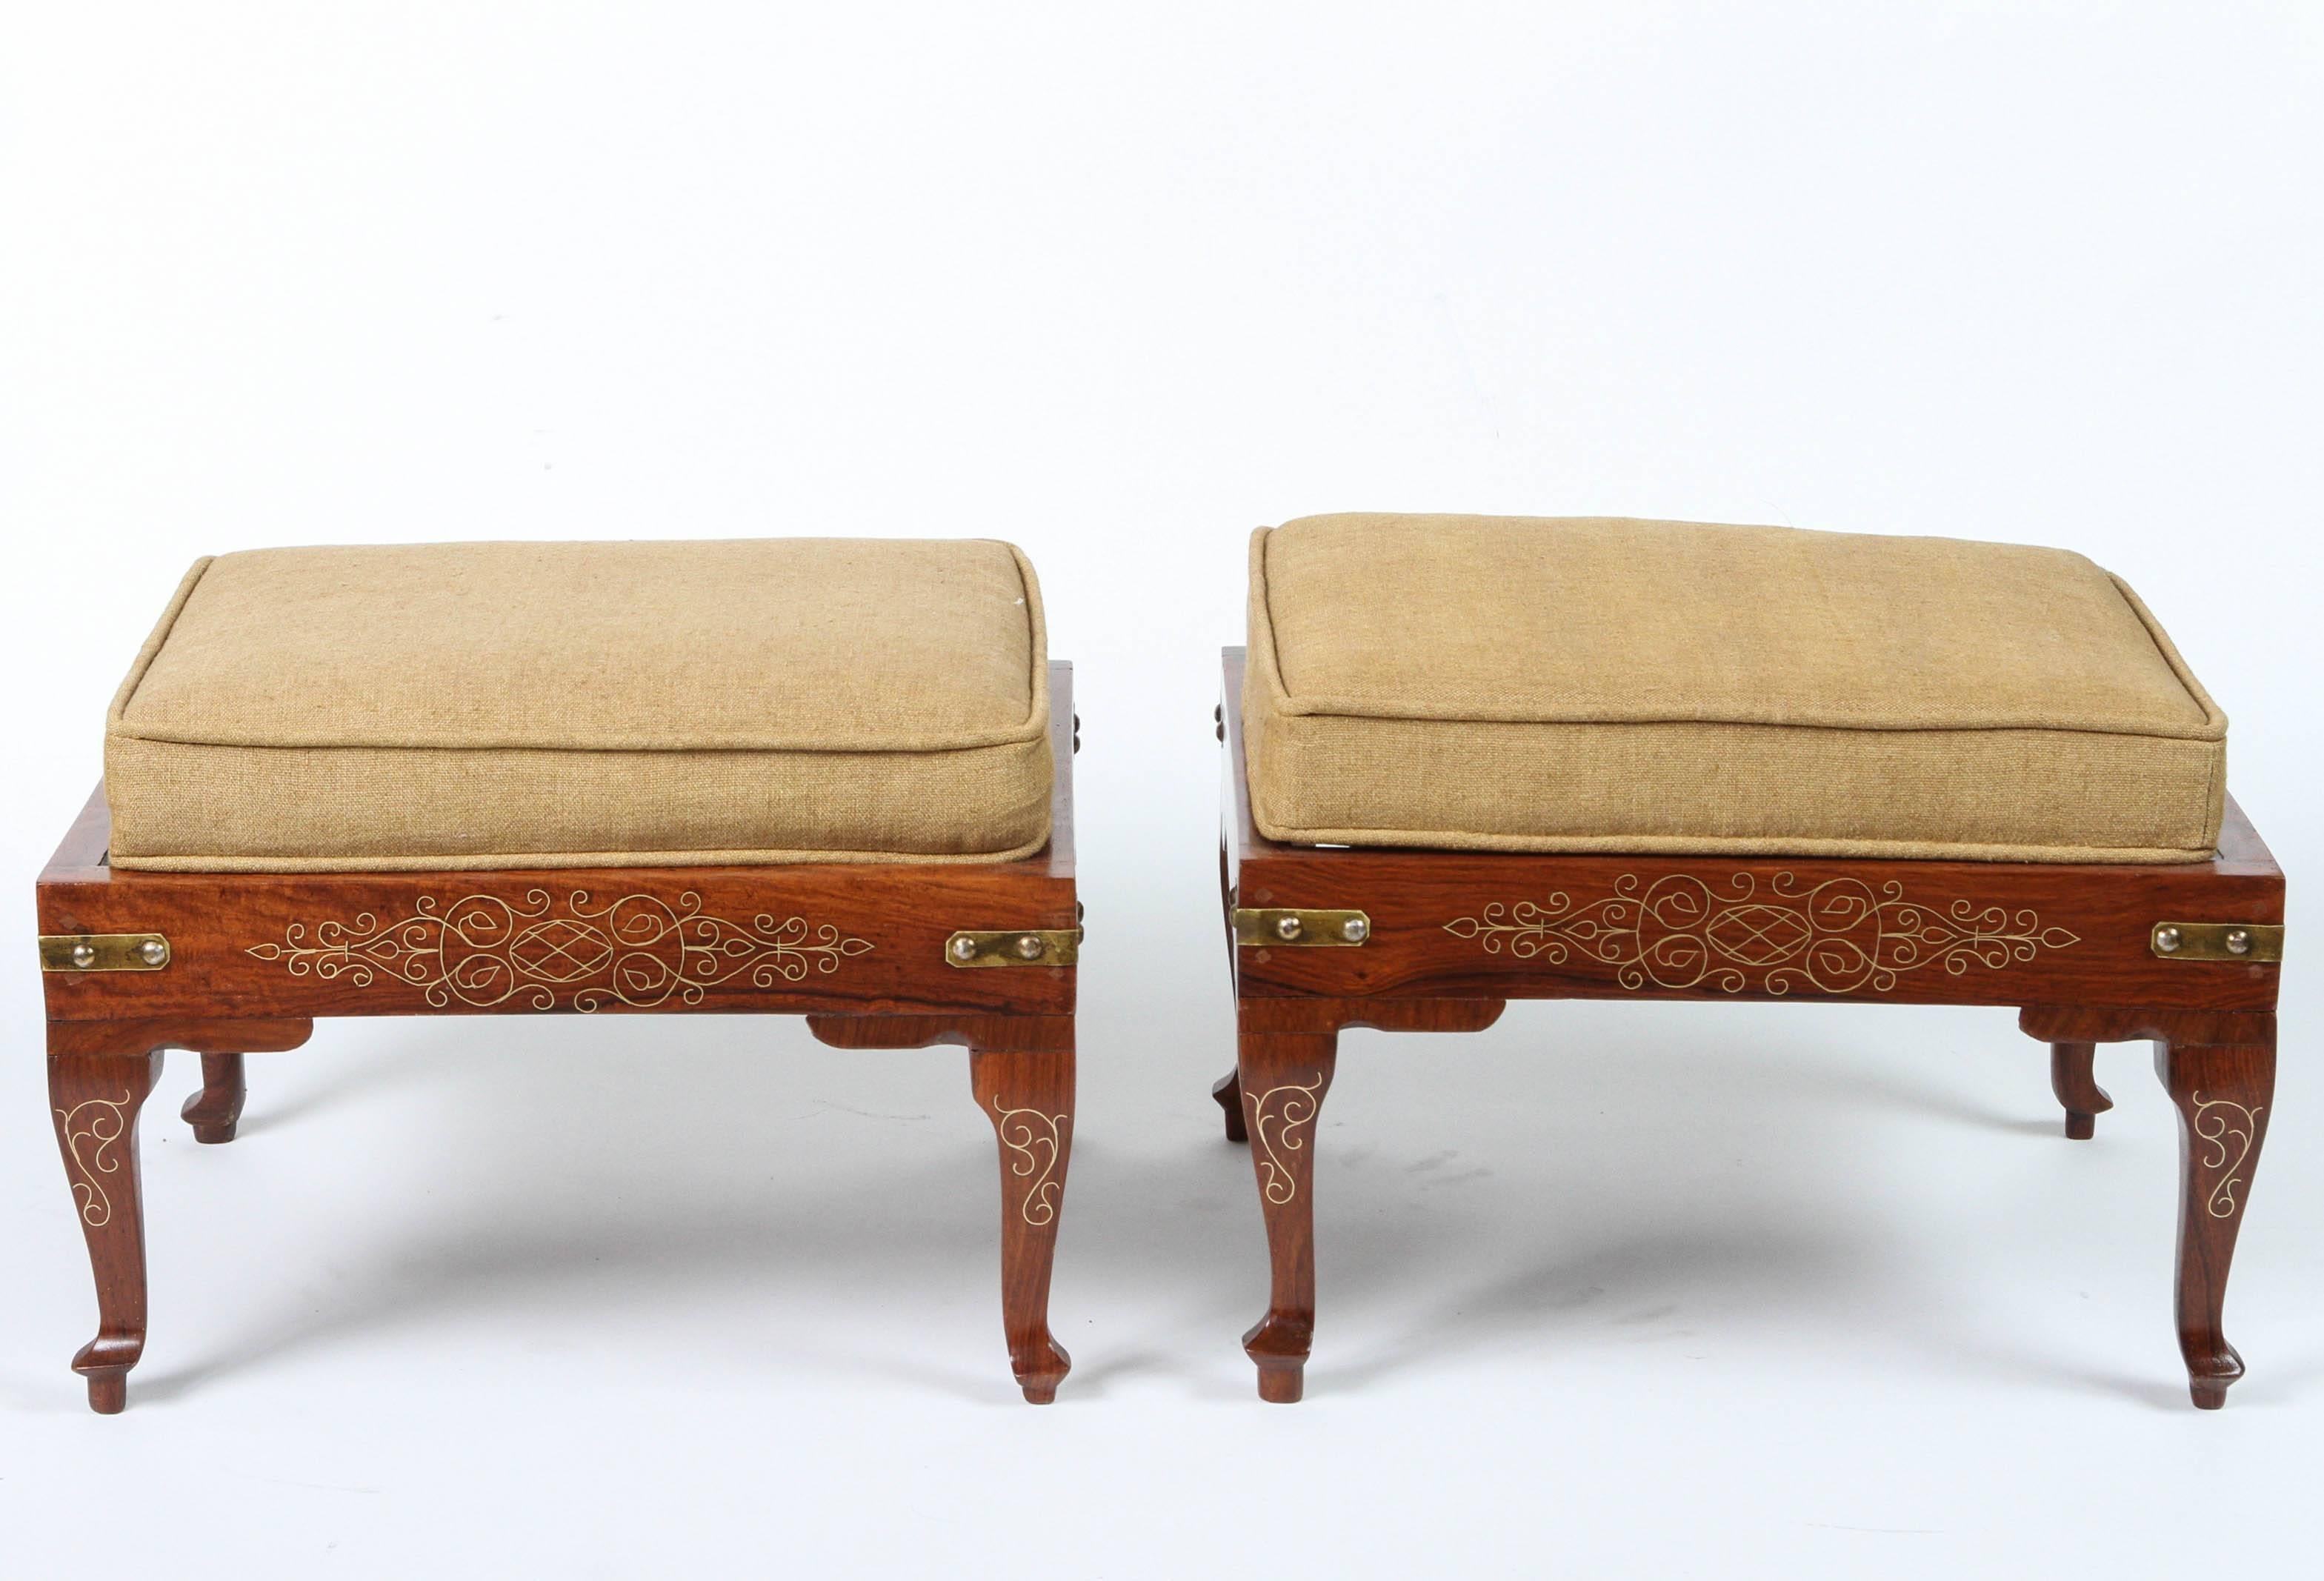 Pair of vintage rosewood footstools with inlay brass details and custom-made linen cushions newly refinished.